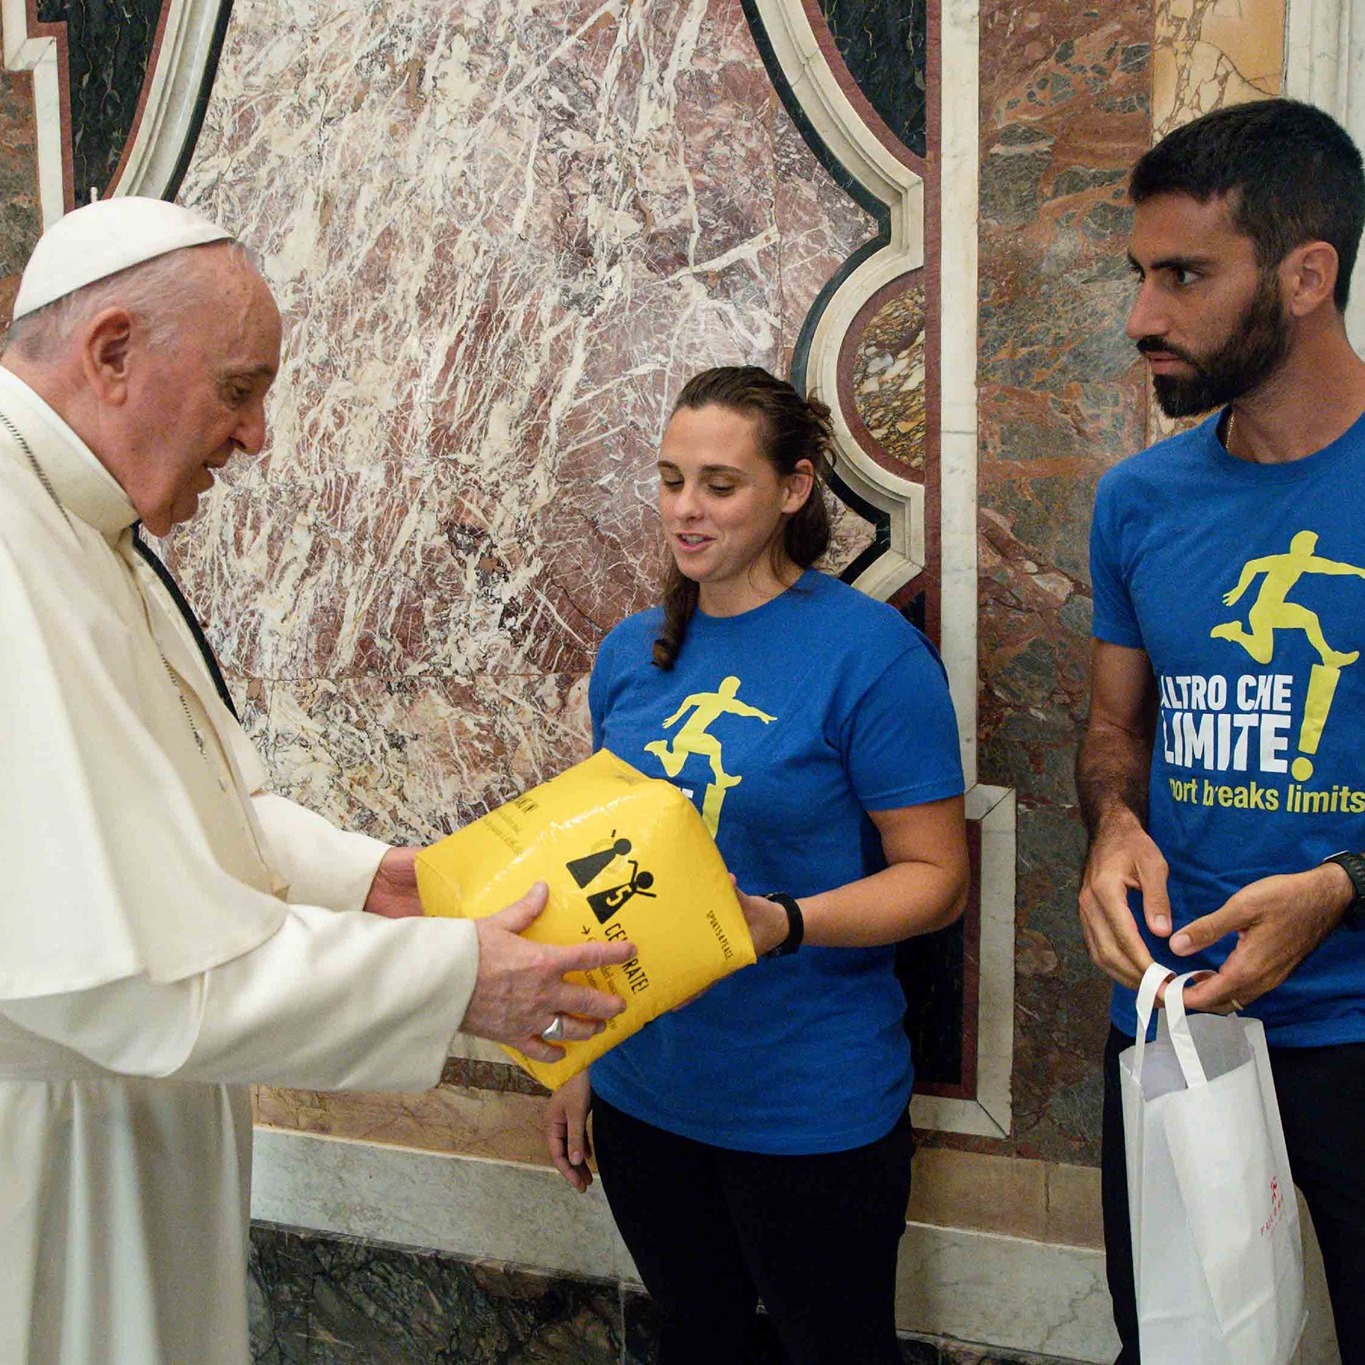 sports4peace in udienza dal papa